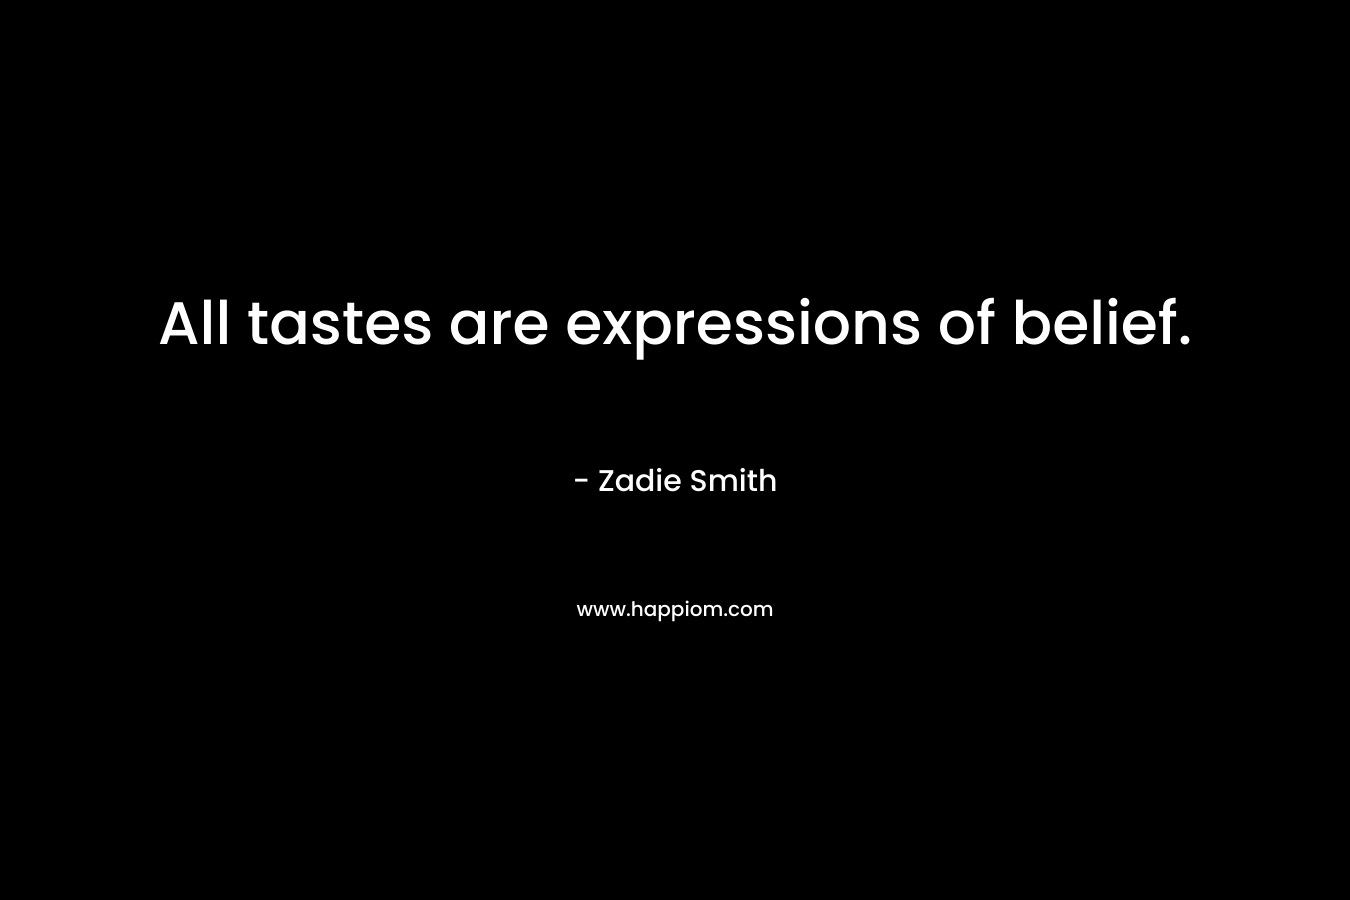 All tastes are expressions of belief. – Zadie Smith